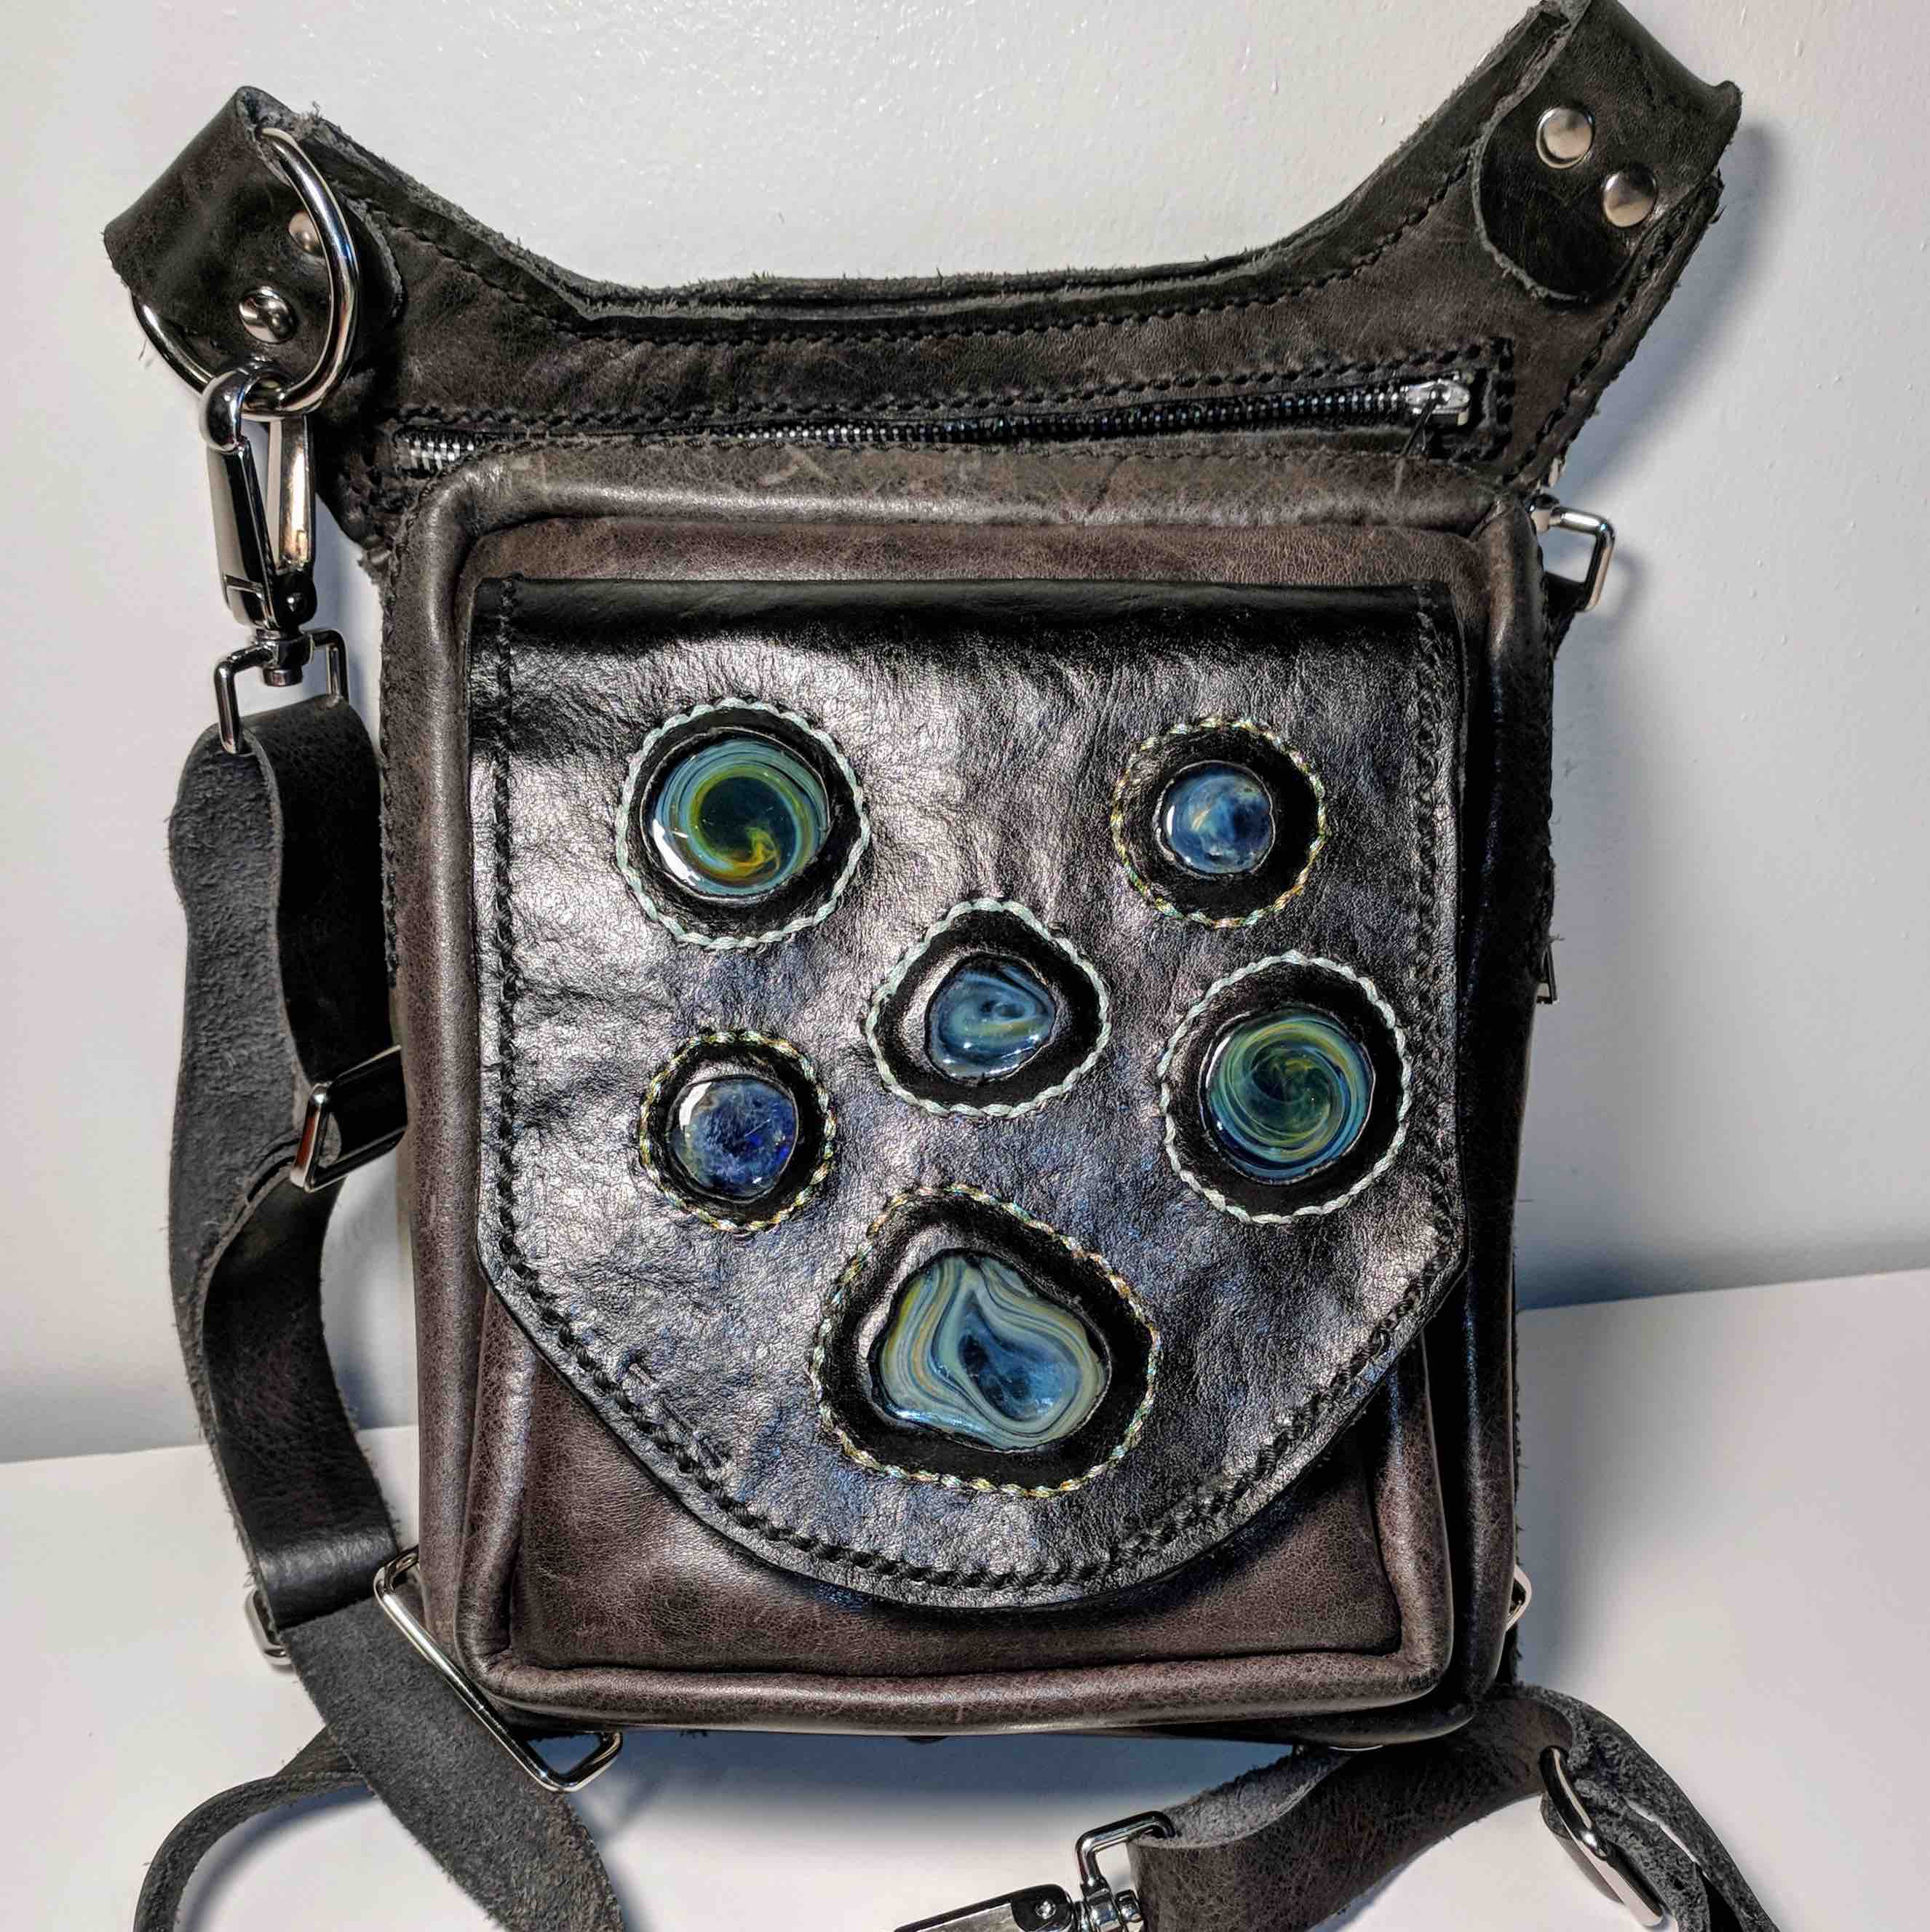 leather purse featuring glass cabachons on the front flap